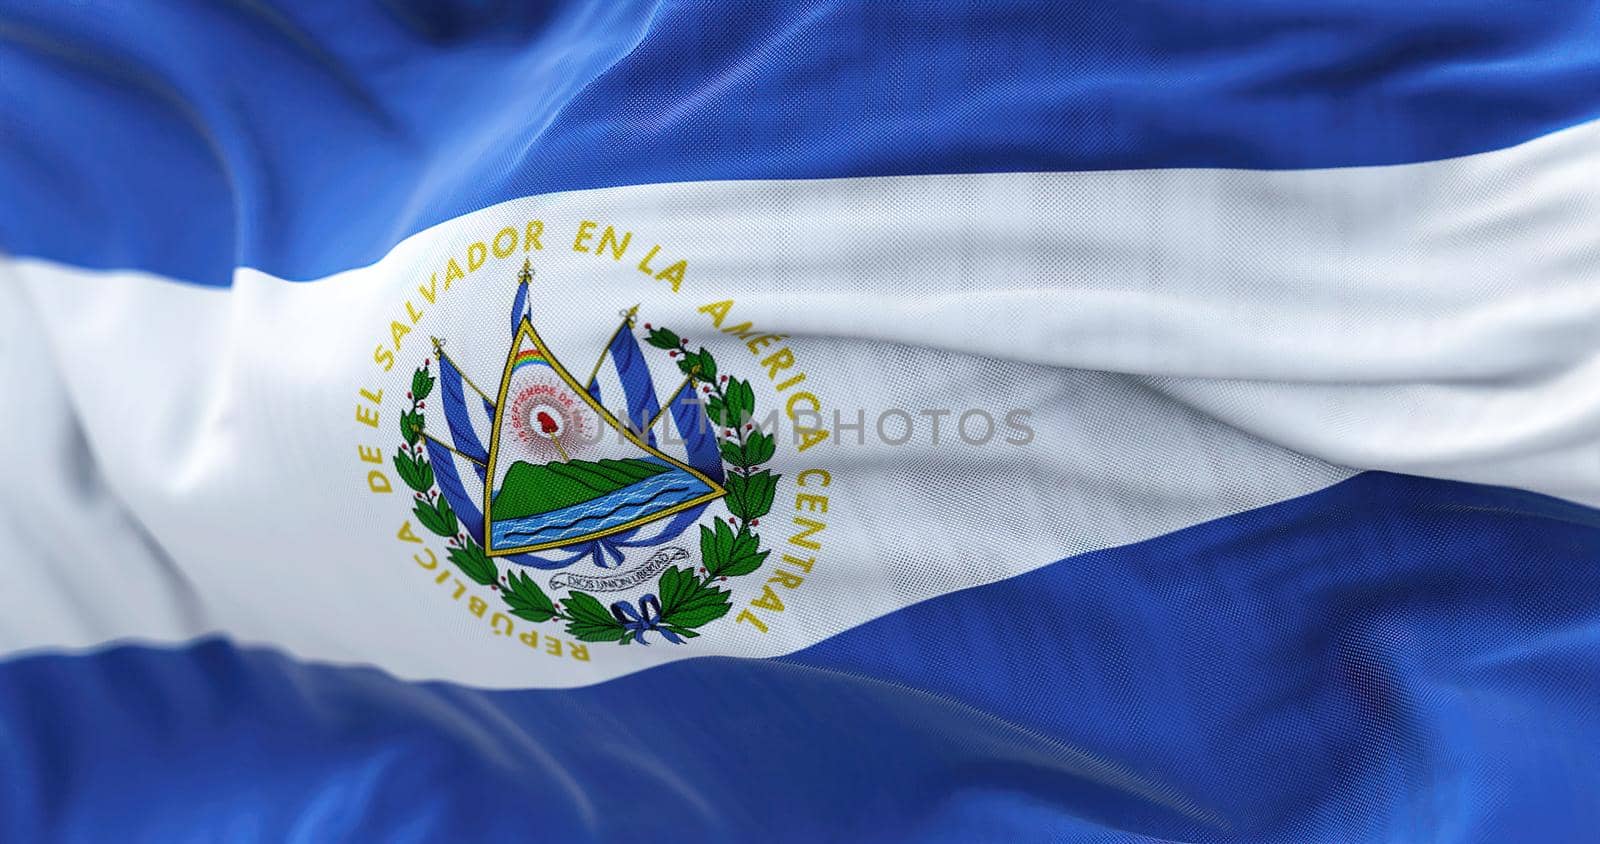 Close-up view of the El Salvador national flag waving in the wind. The Republic of El Salvador is a State of South America. Fabric textured background. Selective focus